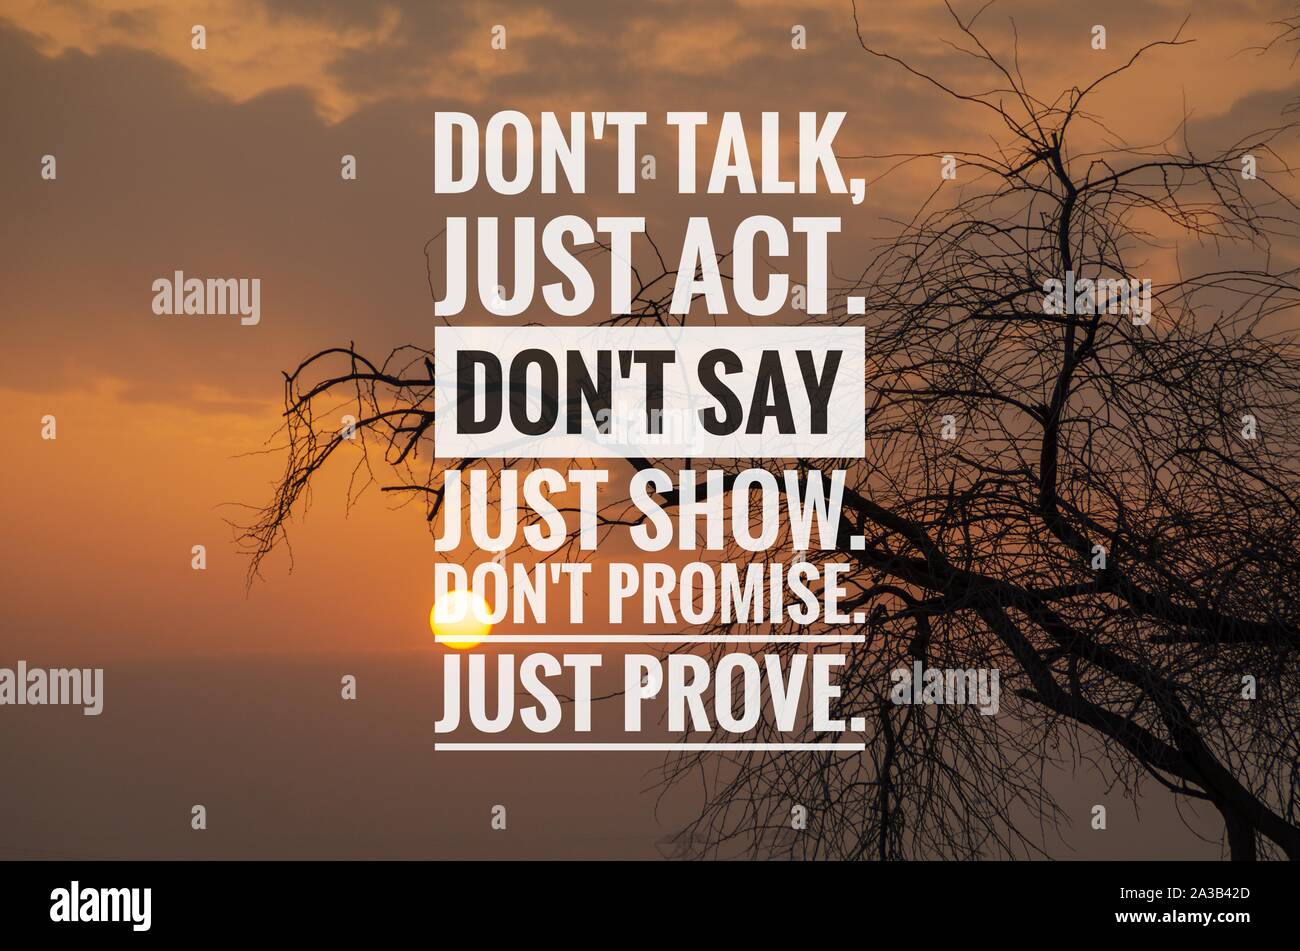 Motivational And Inspirational Quote Don T Talk Just Act Don T Say Just Show Don T Promise Just Prove Stock Photo Alamy